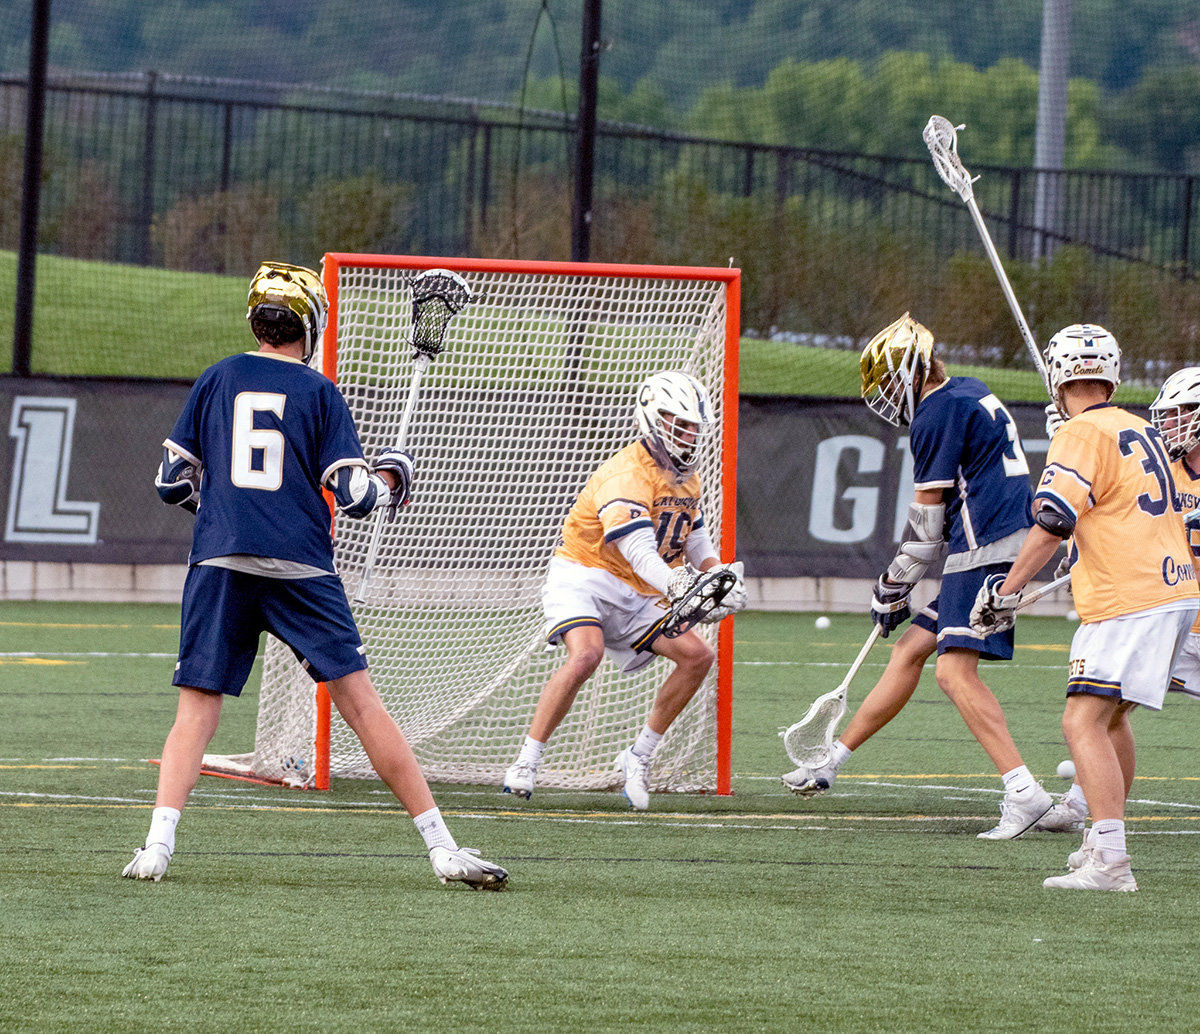 An underhand shot from Charlie Evans gave Severna Park a 6-0 lead.